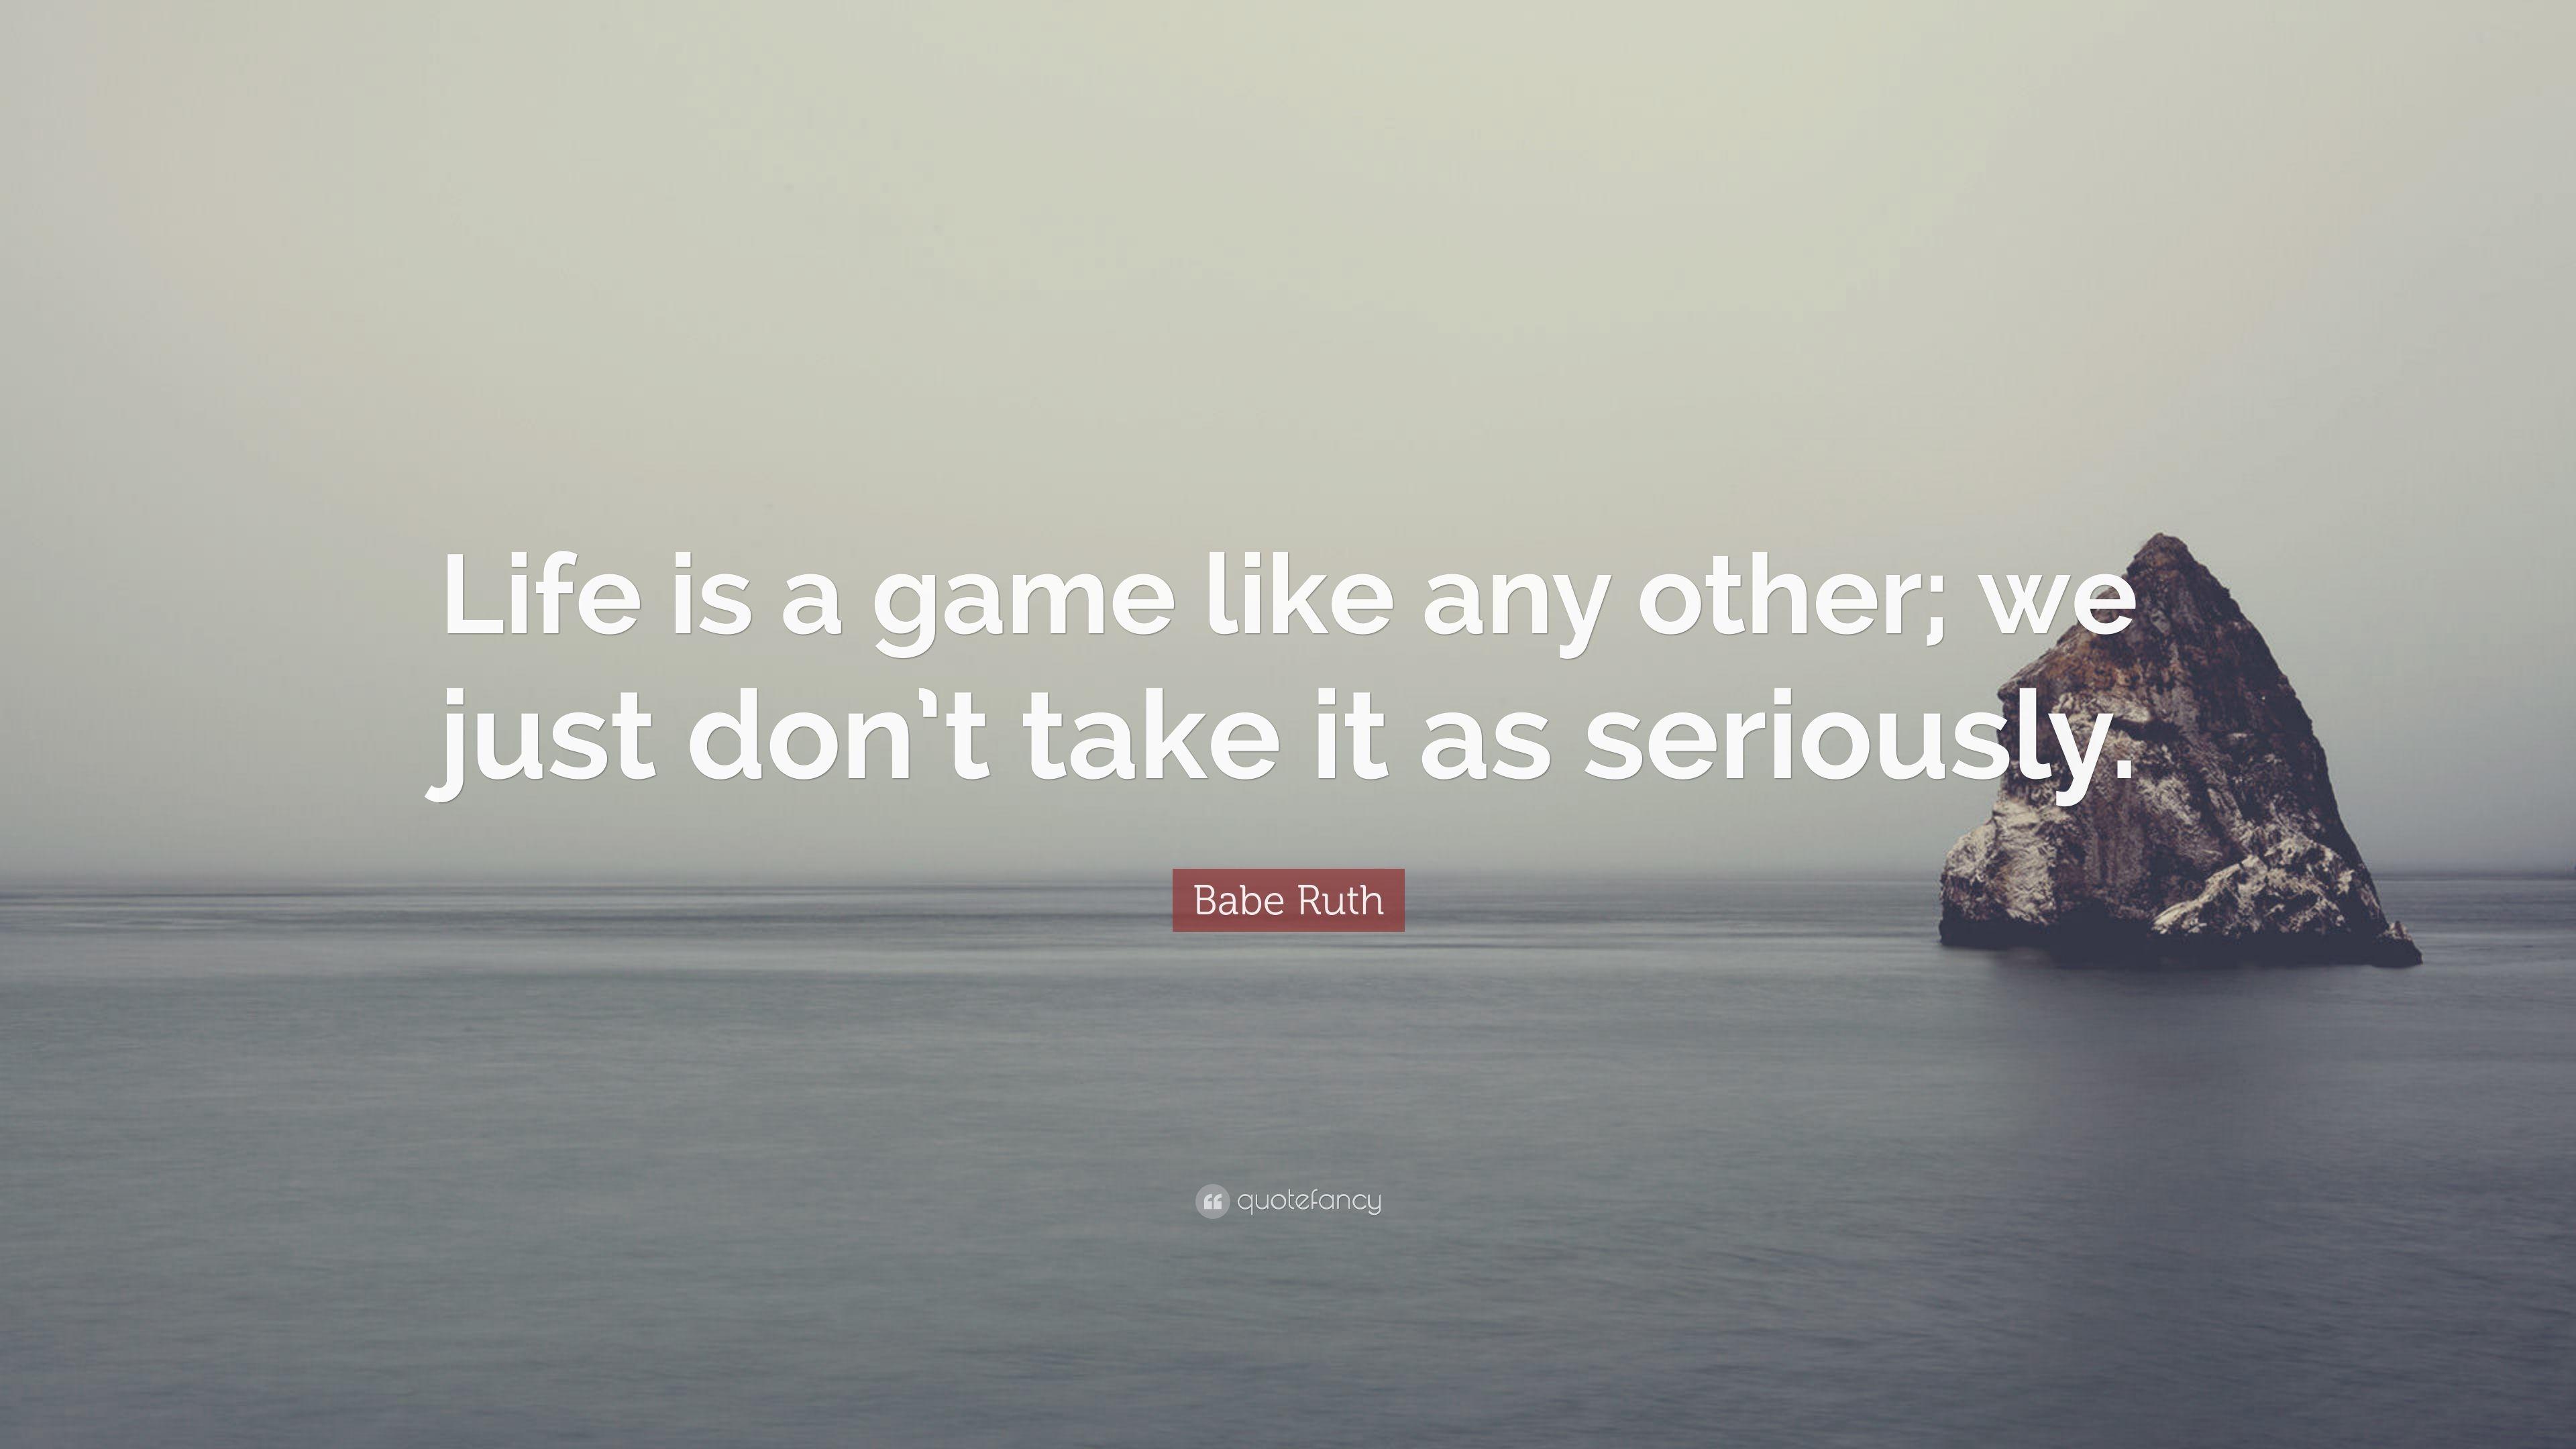 Babe Ruth Quote: “Life is a game like any other; we just don't